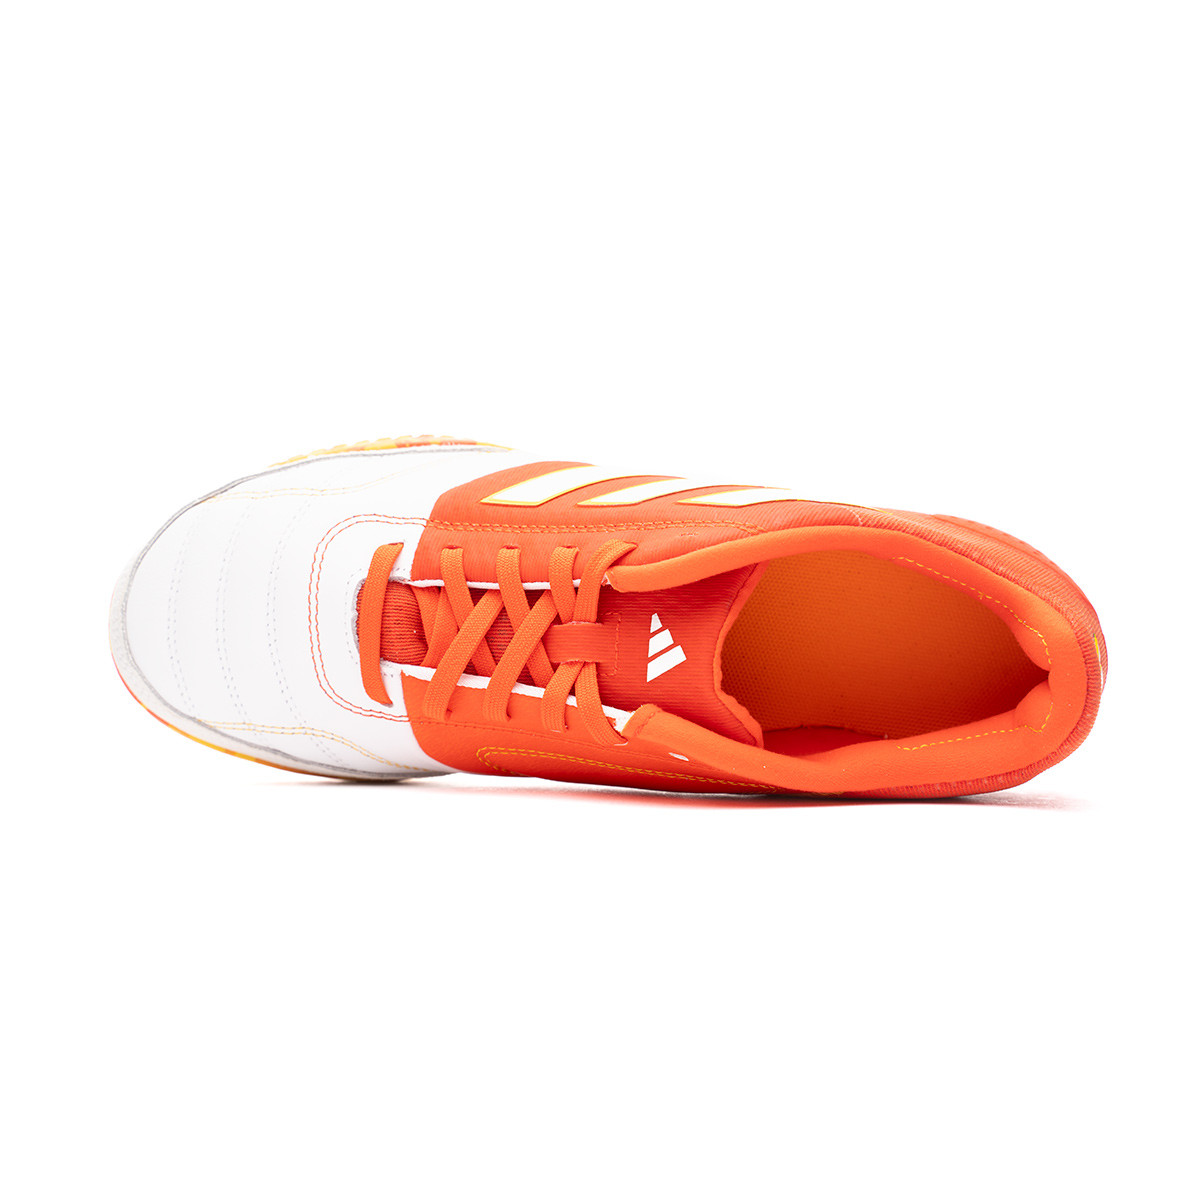 Emotion boots Sala adidas Competition Gold Orange-Ftwr Bold Indoor White-Bold Fútbol Top -